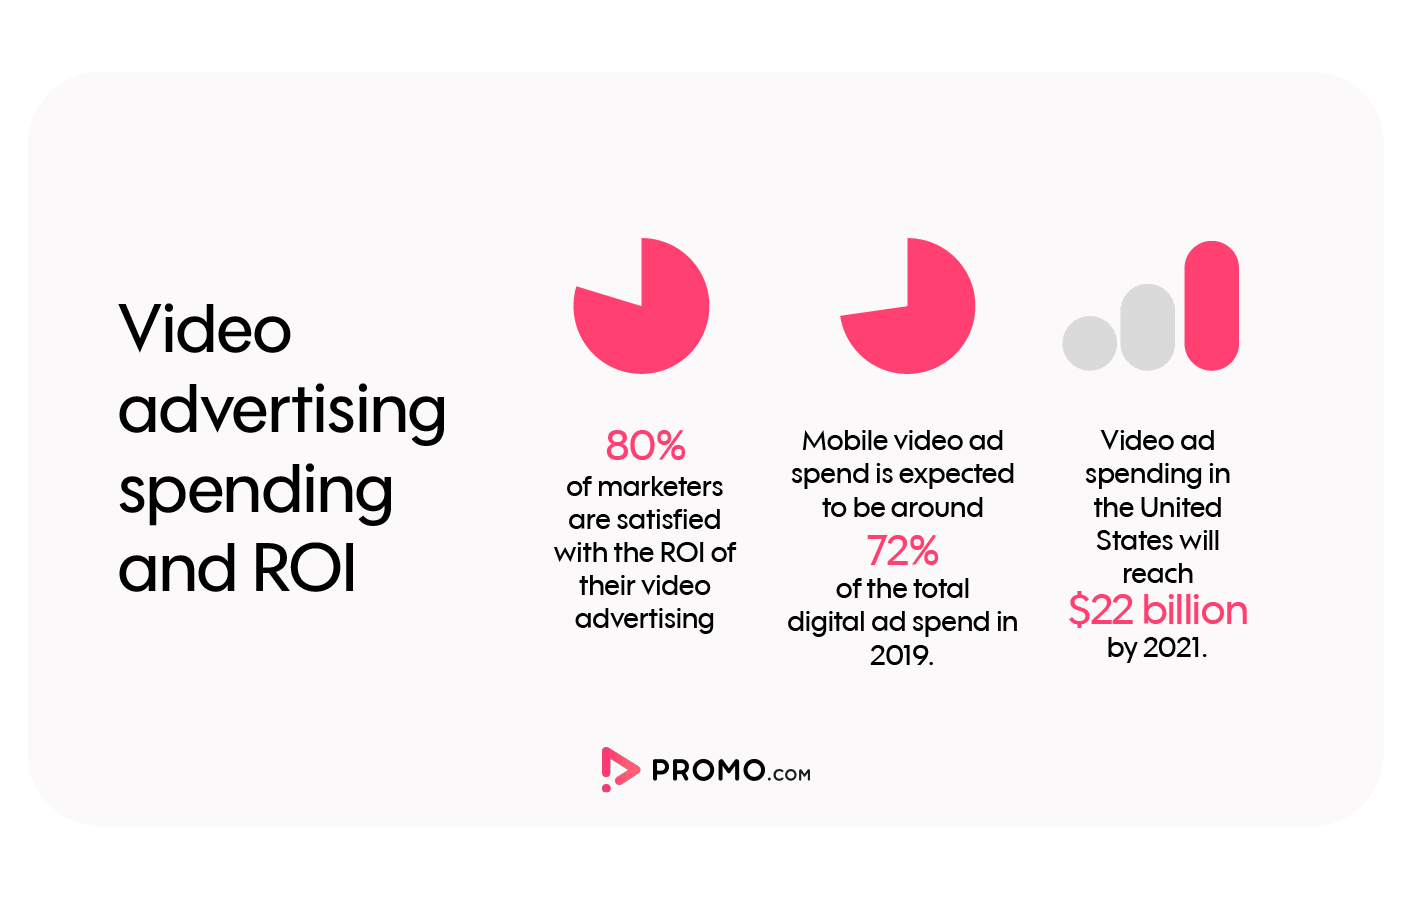 How effective are video ads?